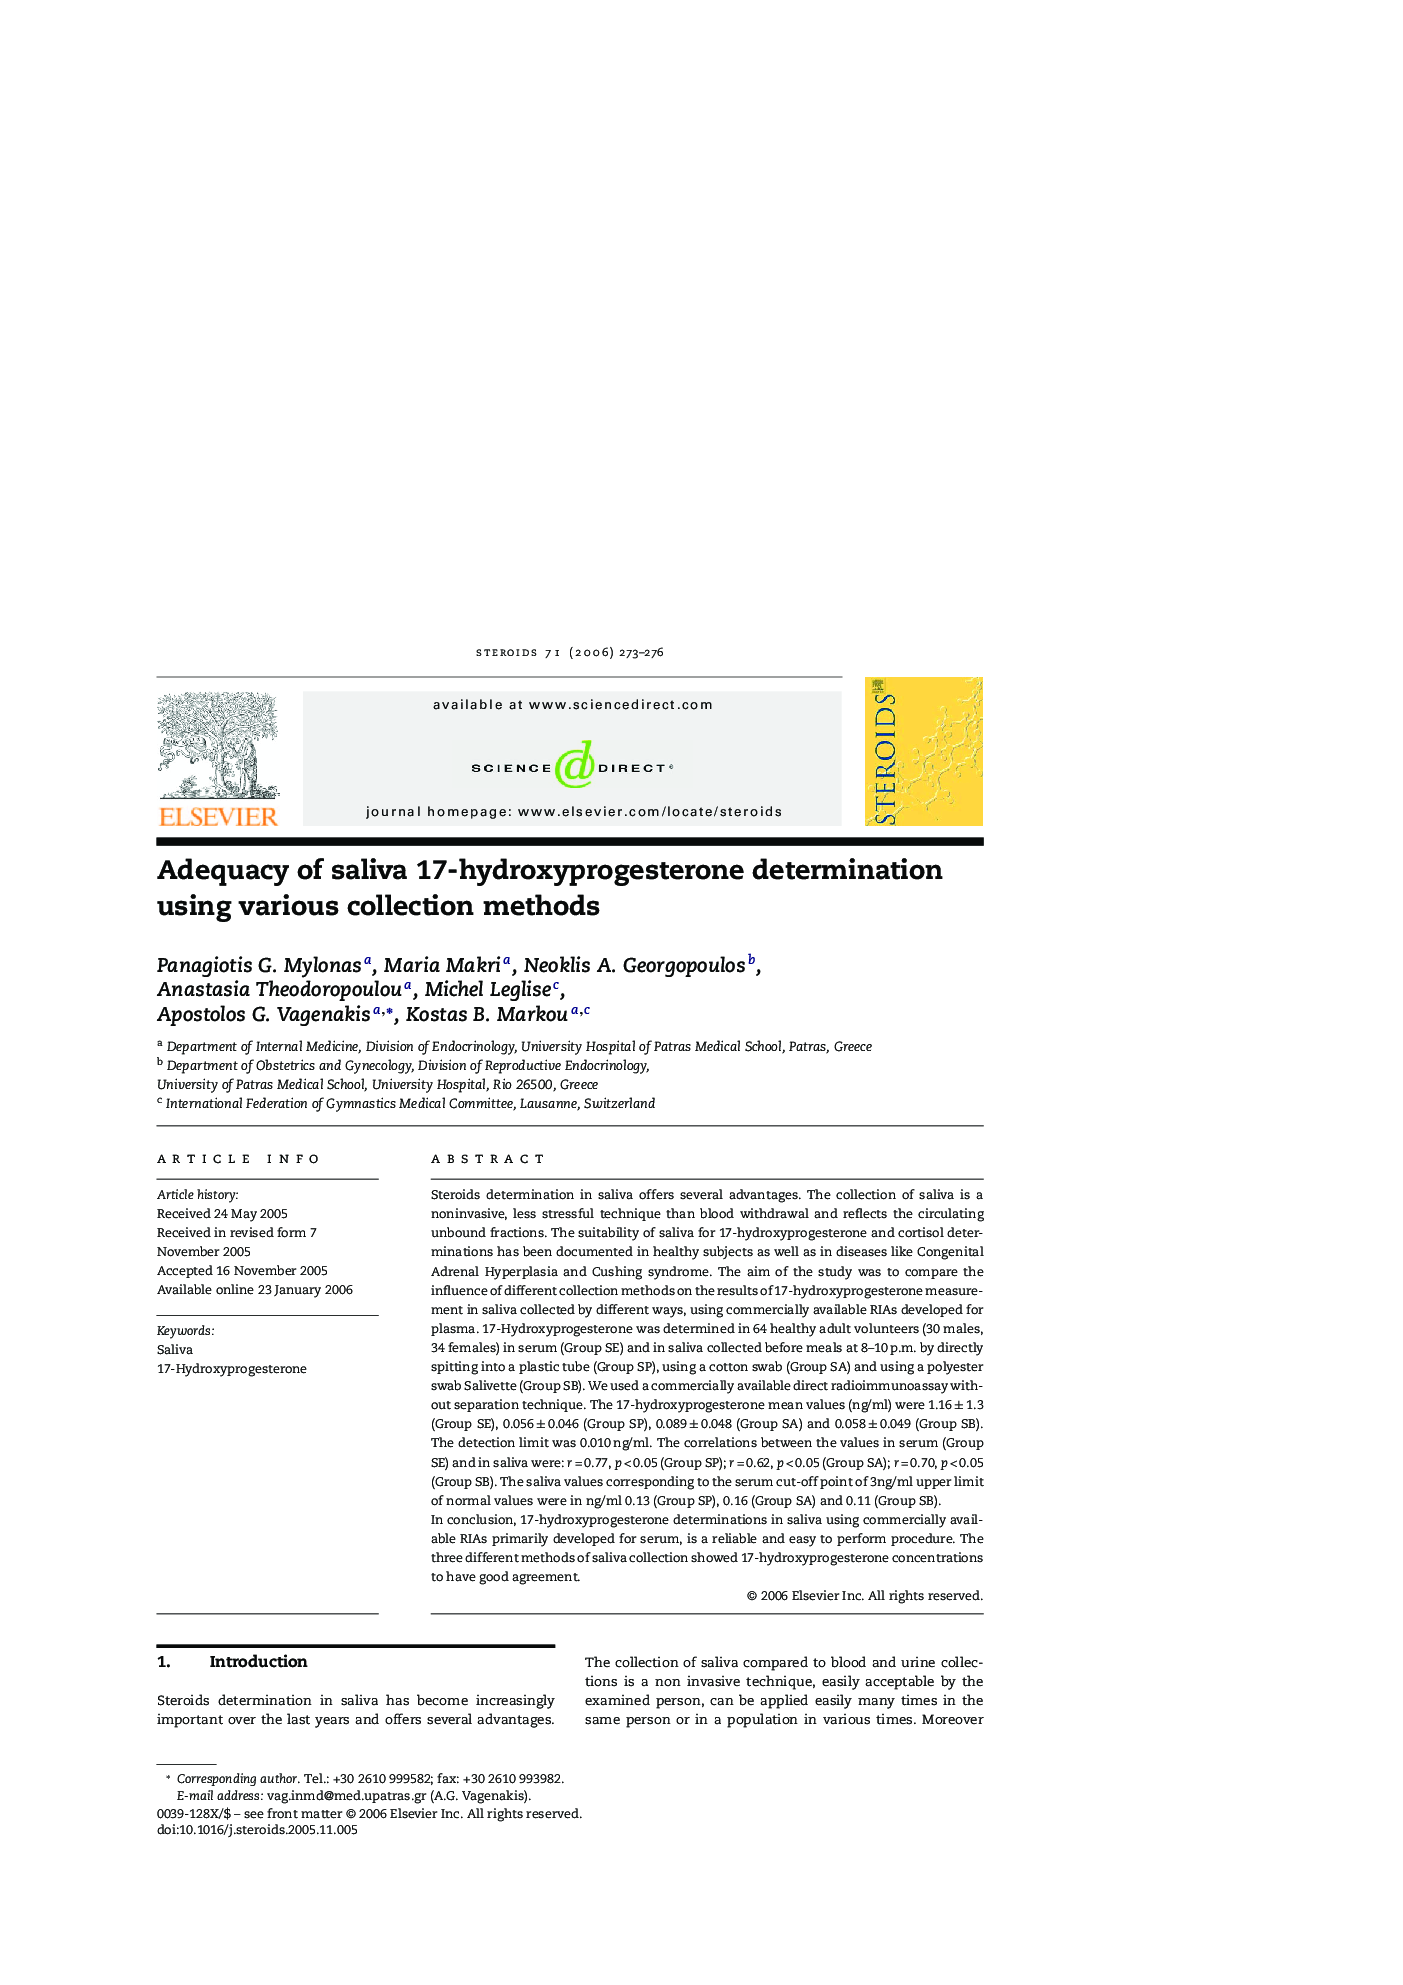 Adequacy of saliva 17-hydroxyprogesterone determination using various collection methods